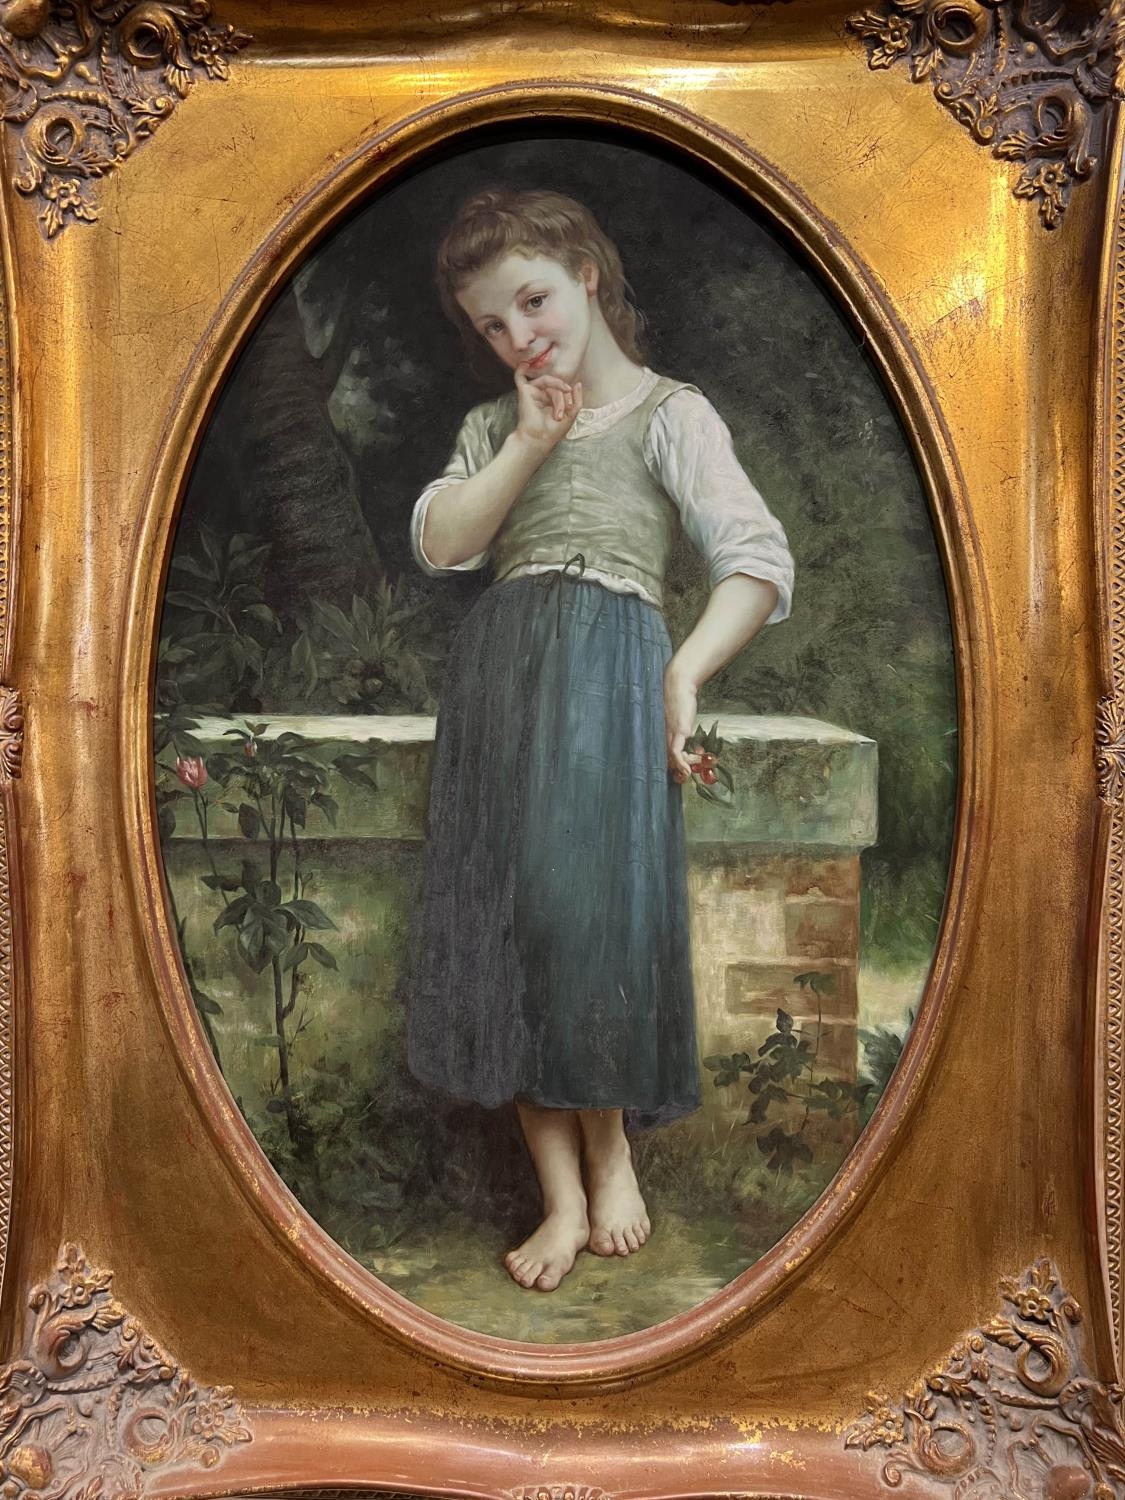 AFTER CHARLES-AMABLE LENOIR (1860-1926) 'The Cherry Picker', oil on canvas, 86cm x 55cm, gilt - Image 2 of 4